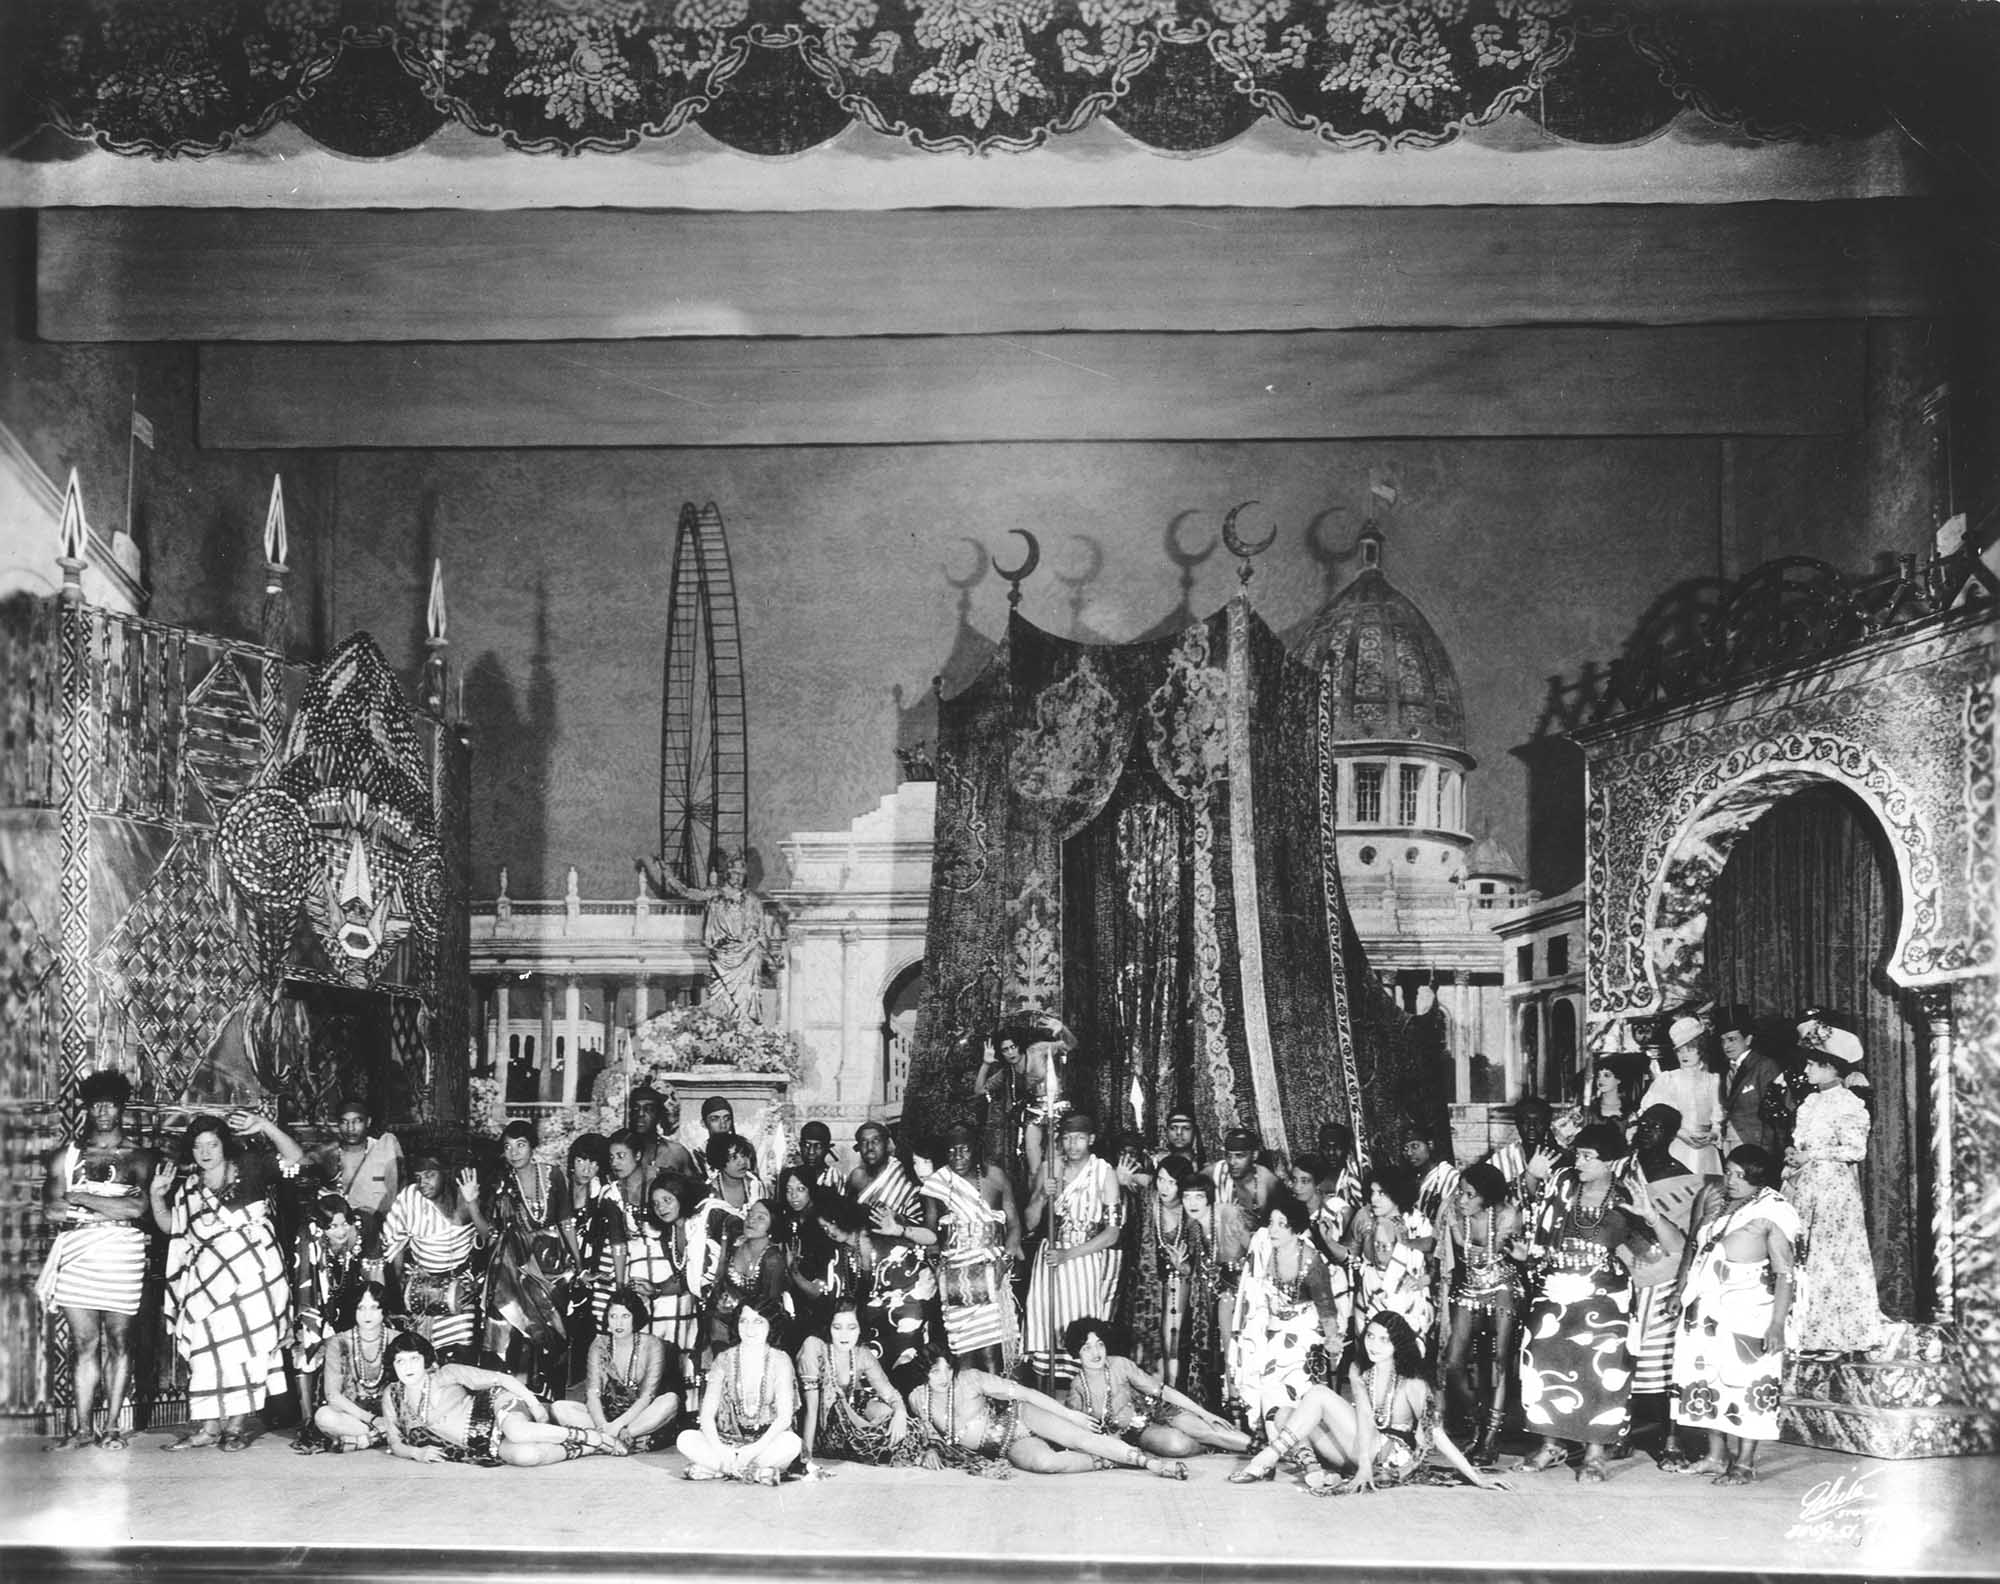 A photo from the 1927 Broadway Production of Show Boat.